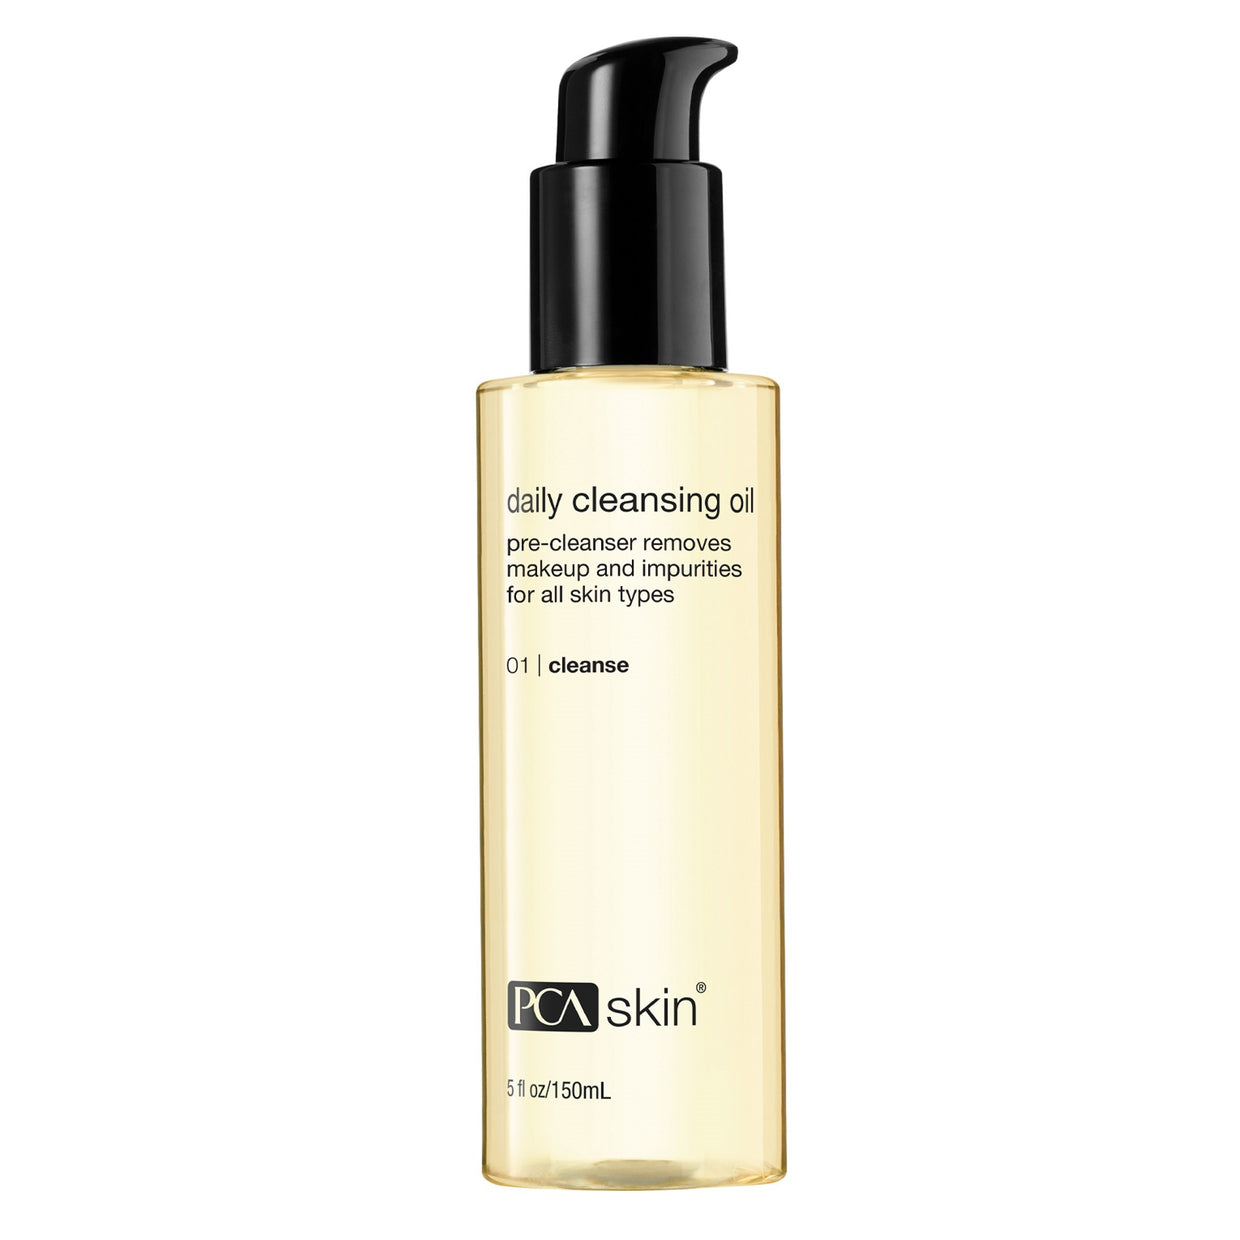 PCA Skin Daily Cleansing Oil shop at Exclusive Beauty